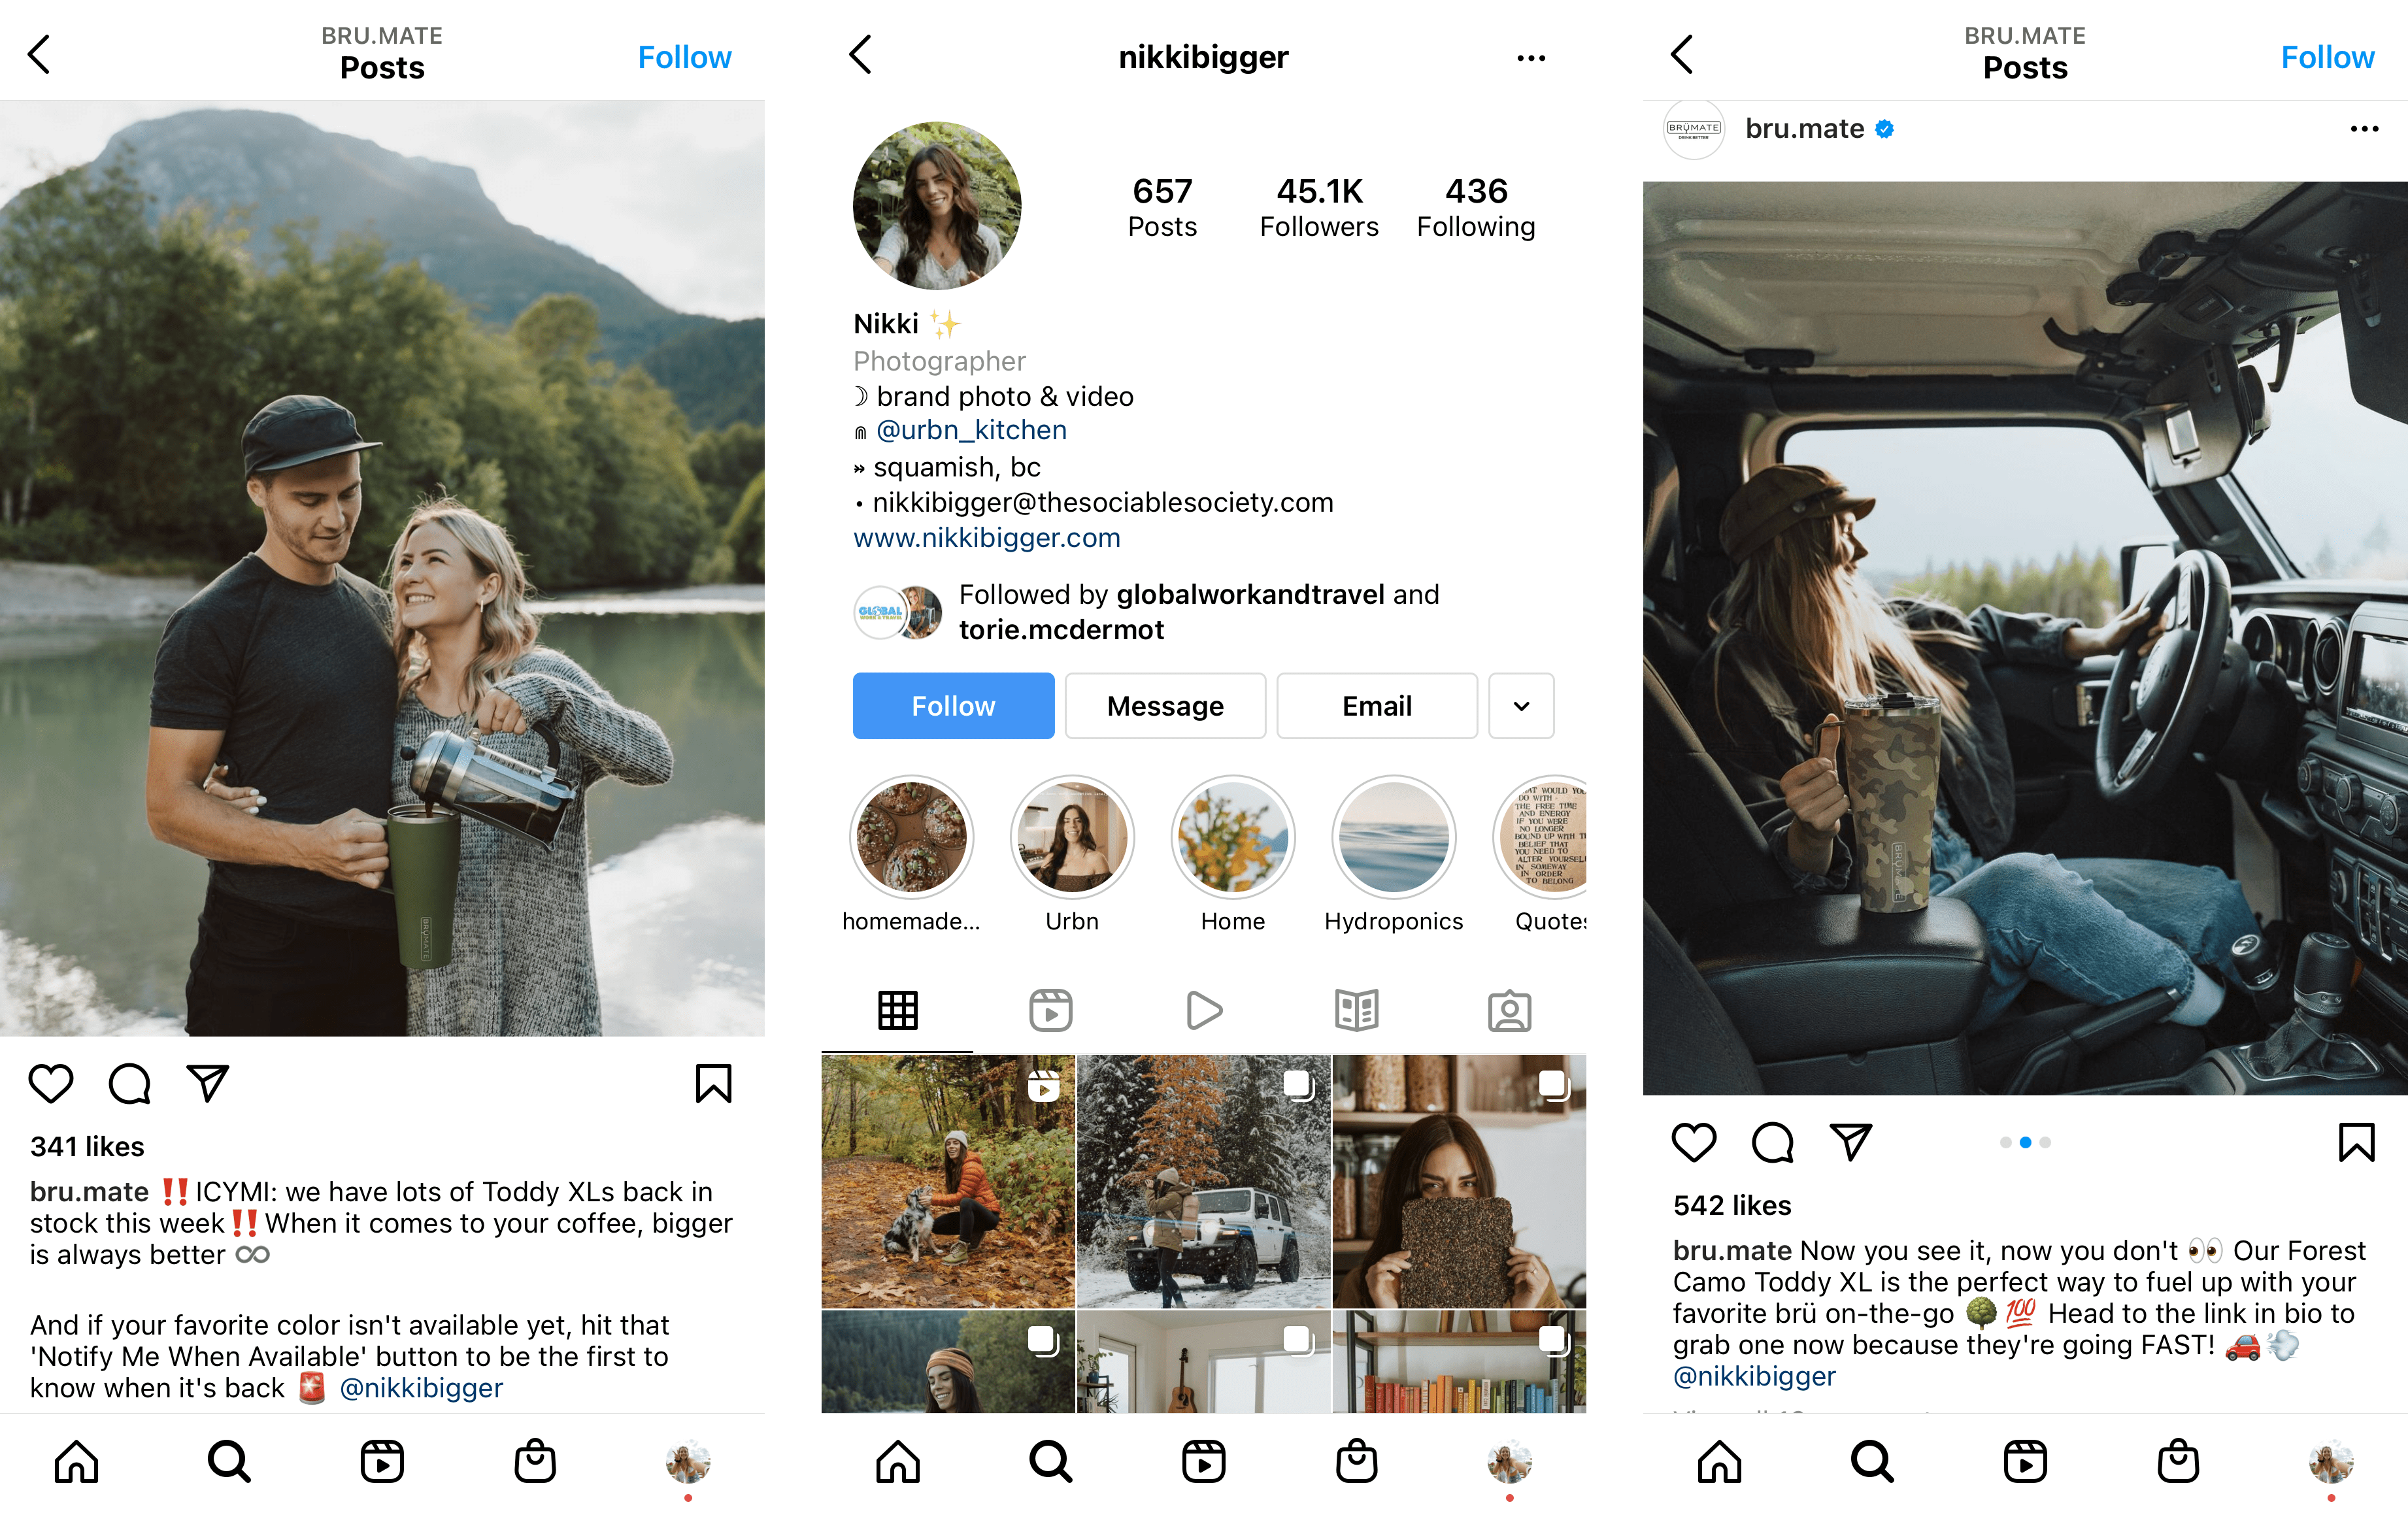 MicroInfluencers–These 3 screenshots show BrüMate’s use of Nikki Bigger as a micro influencer. One photo shows a photo of Nikki on BrüMate’s Instagram feed, tagging Nikki in the caption. The next photo shows Nikki’s Instagram profile. The third shows another photo of Nikki posted on BrüMate’s Instagram, demonstrating a longer-term partnership.